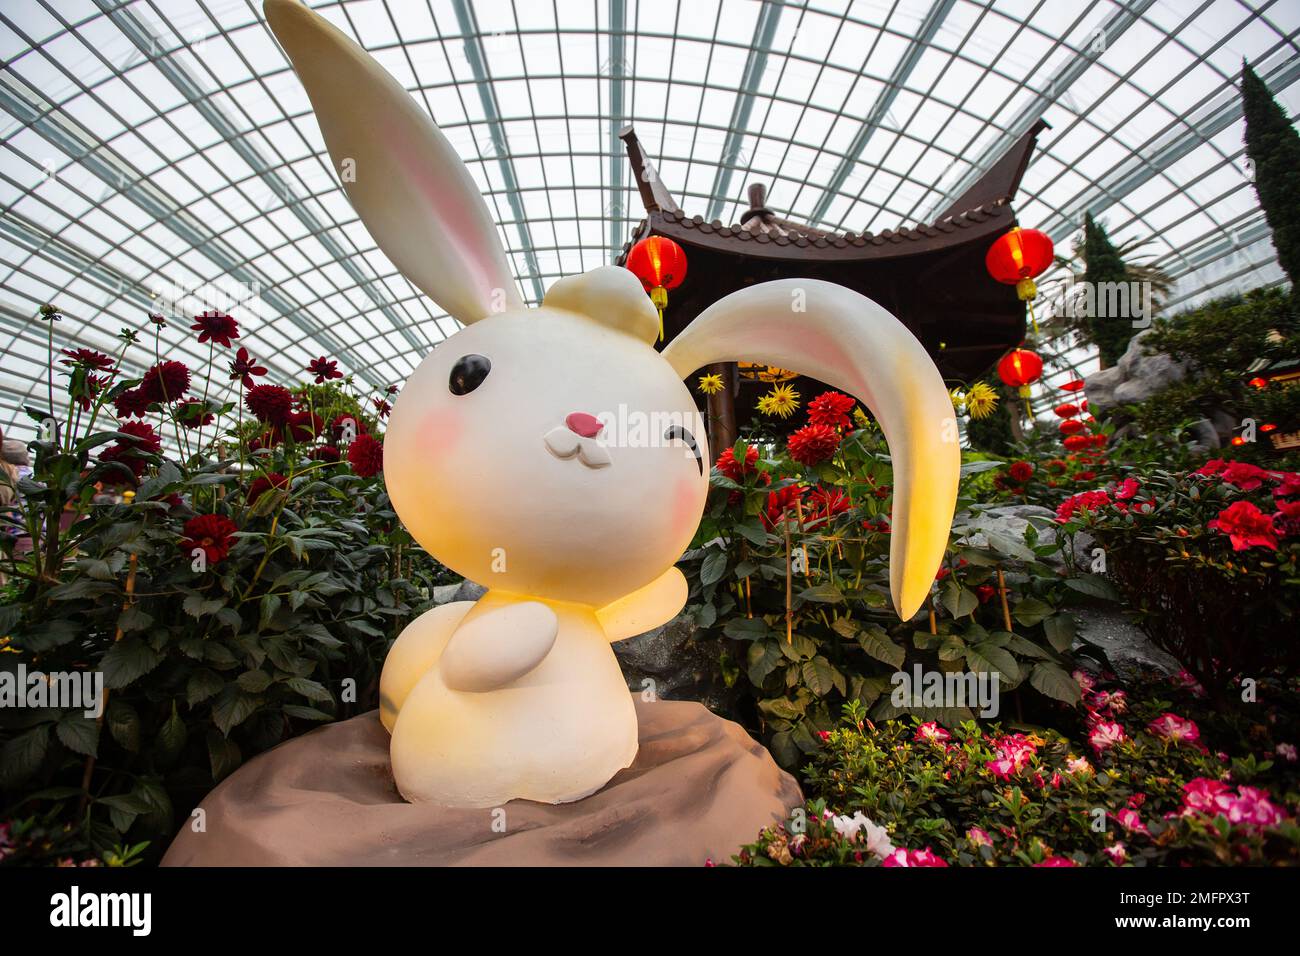 Super cute bunny winking statue decoration inside Flower Dome attraction point, Gardens by the Bay, Singapore. Stock Photo